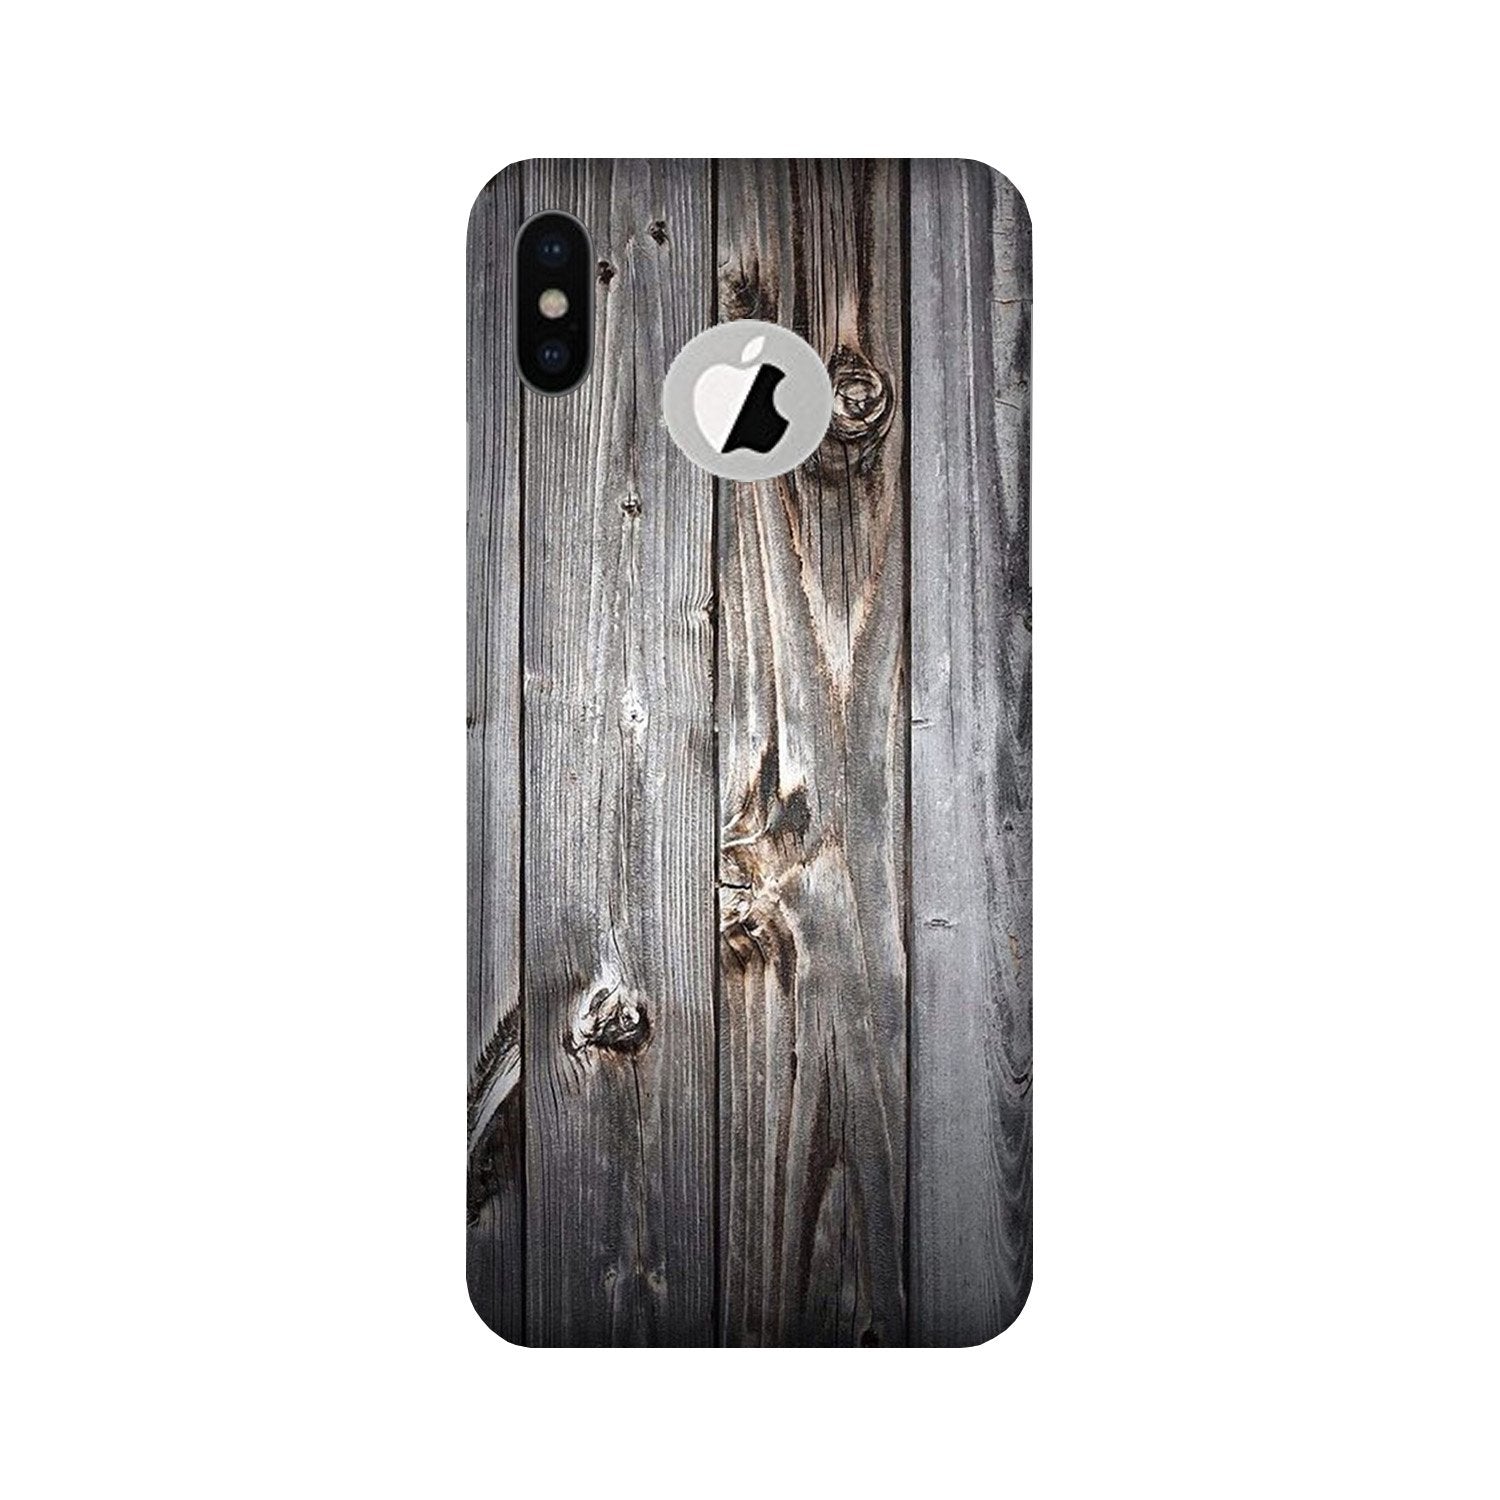 Wooden Look Case for iPhone Xs logo cut (Design - 114)